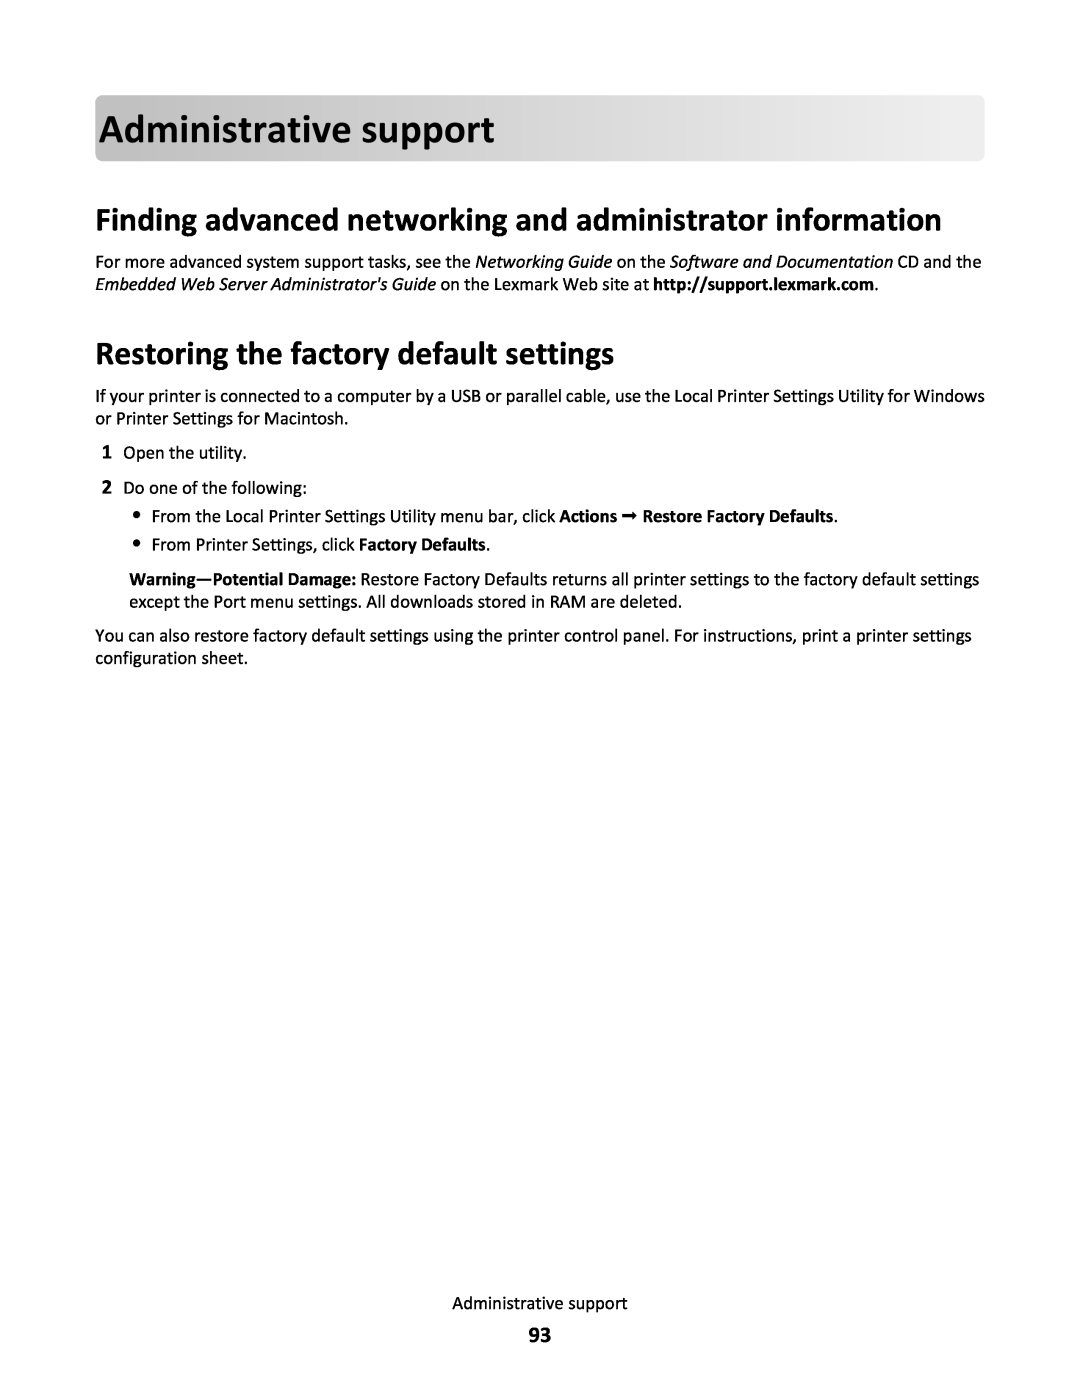 Lexmark 34S0305, 34S0100, 34S0300, 34S5164 Adminis trativesupport, Finding advanced networking and administrator information 